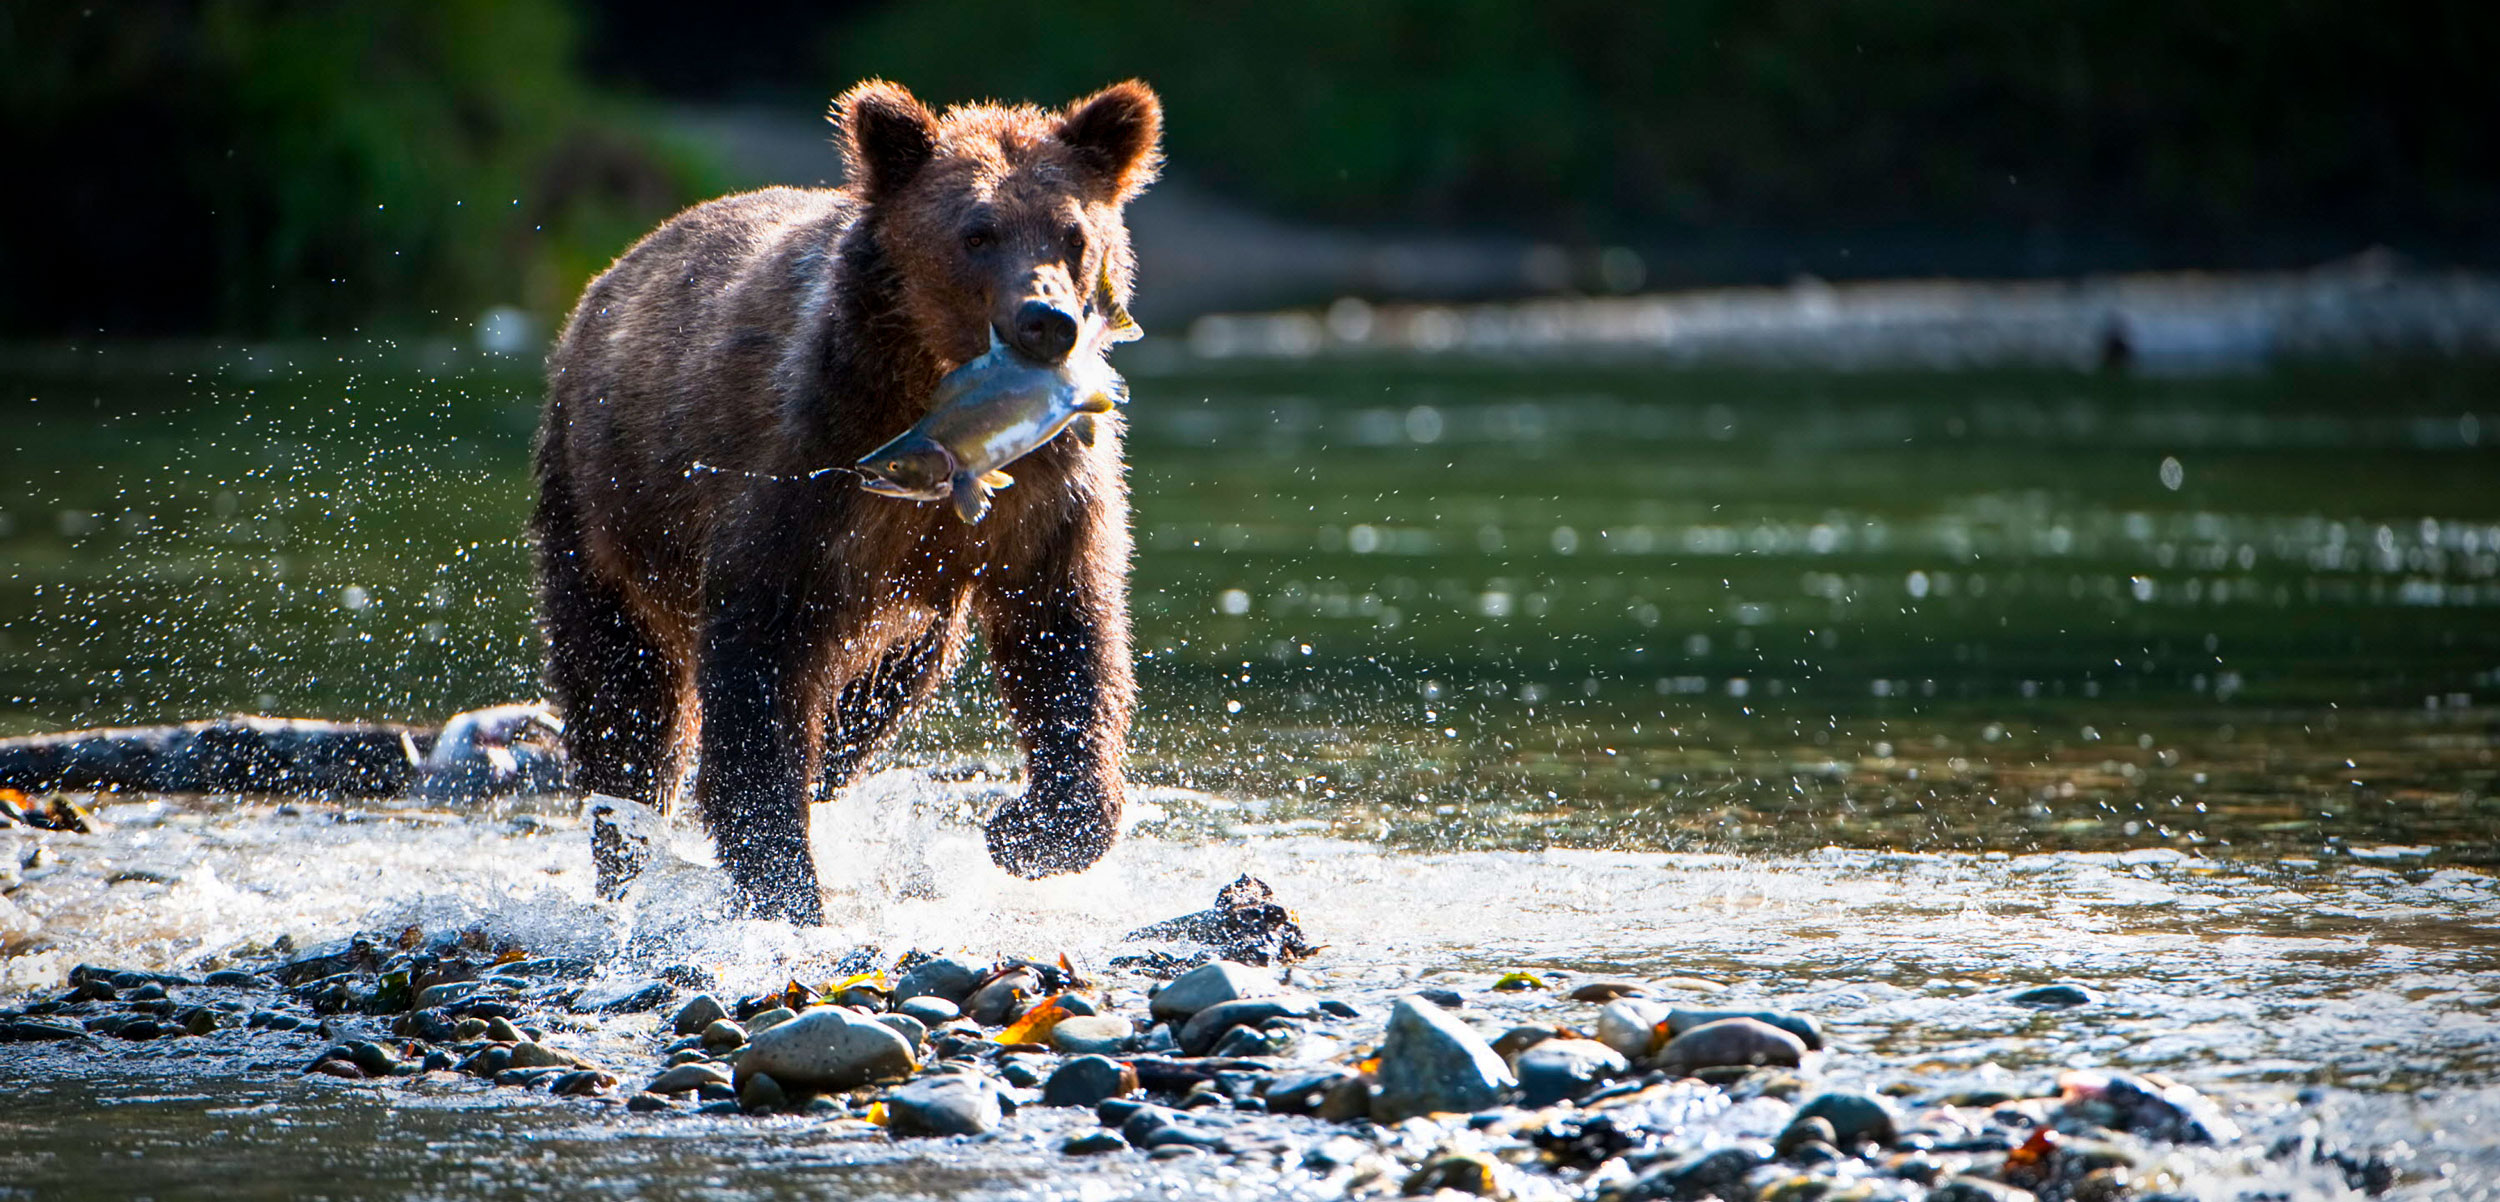 rizzly bear (Ursus arctos horribilis) running through water carrying Pink salmon (Oncorhynchus gorbuscha)